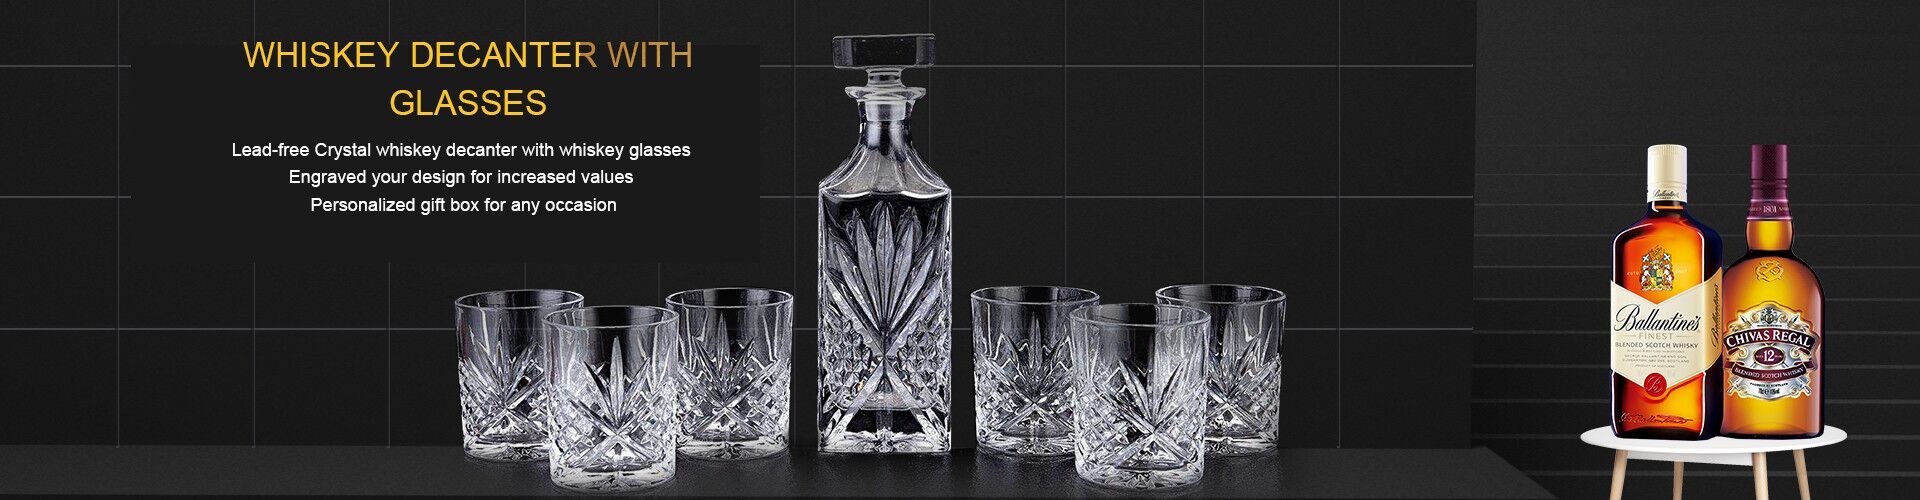 engraved whiskey decanter with rock glasses